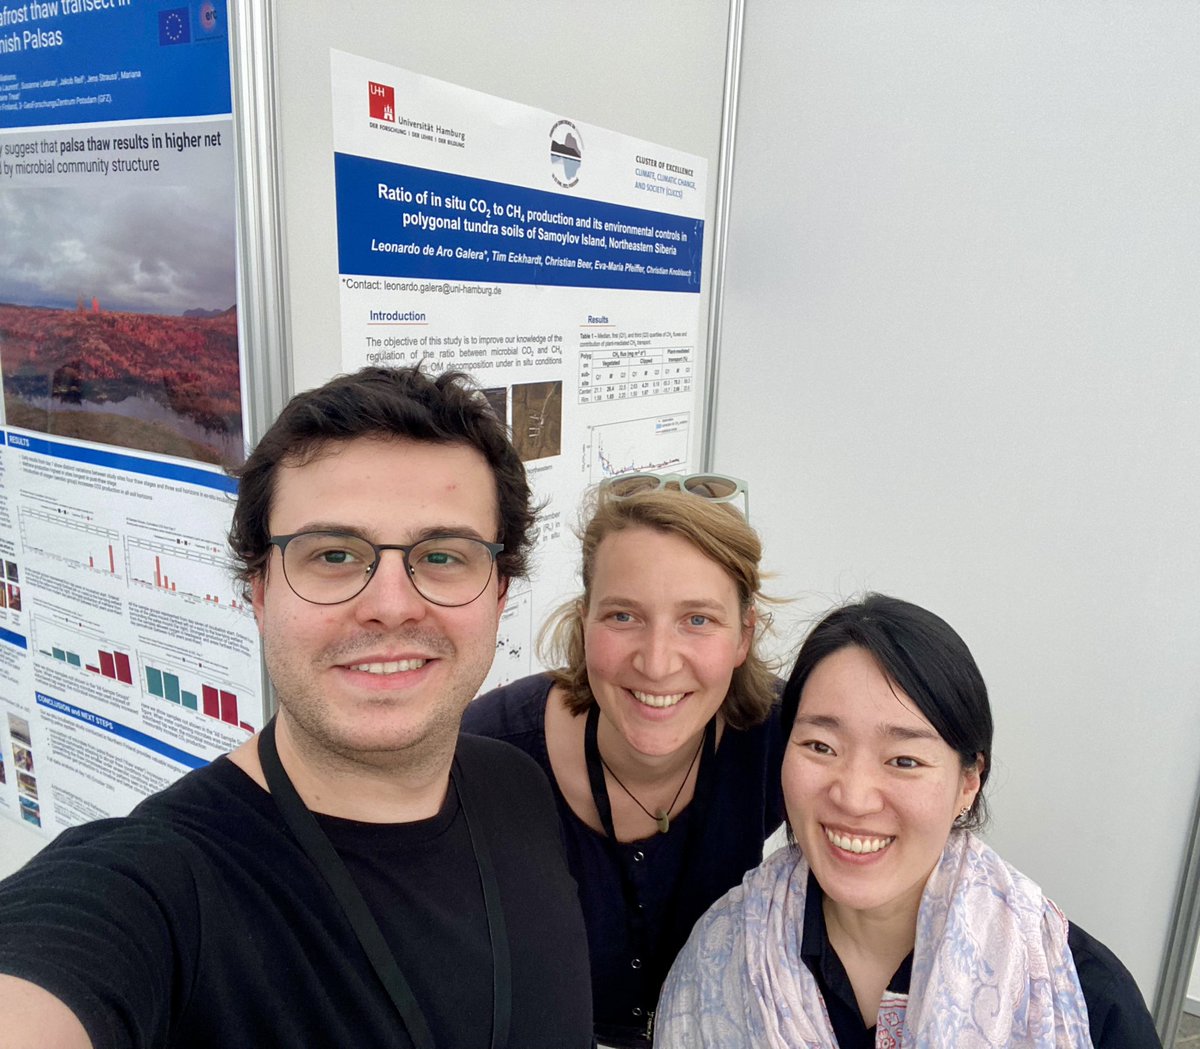 @unihh @CENunihh team at the European Conference on Permafrost 2023 ❄️ in Puigcerdá @UniBarcelona 

Great opportunity to meet colleagues and have a grasp on what is going on in permafrost research. Also great to meet old friends from previous expeditions and collaborations!